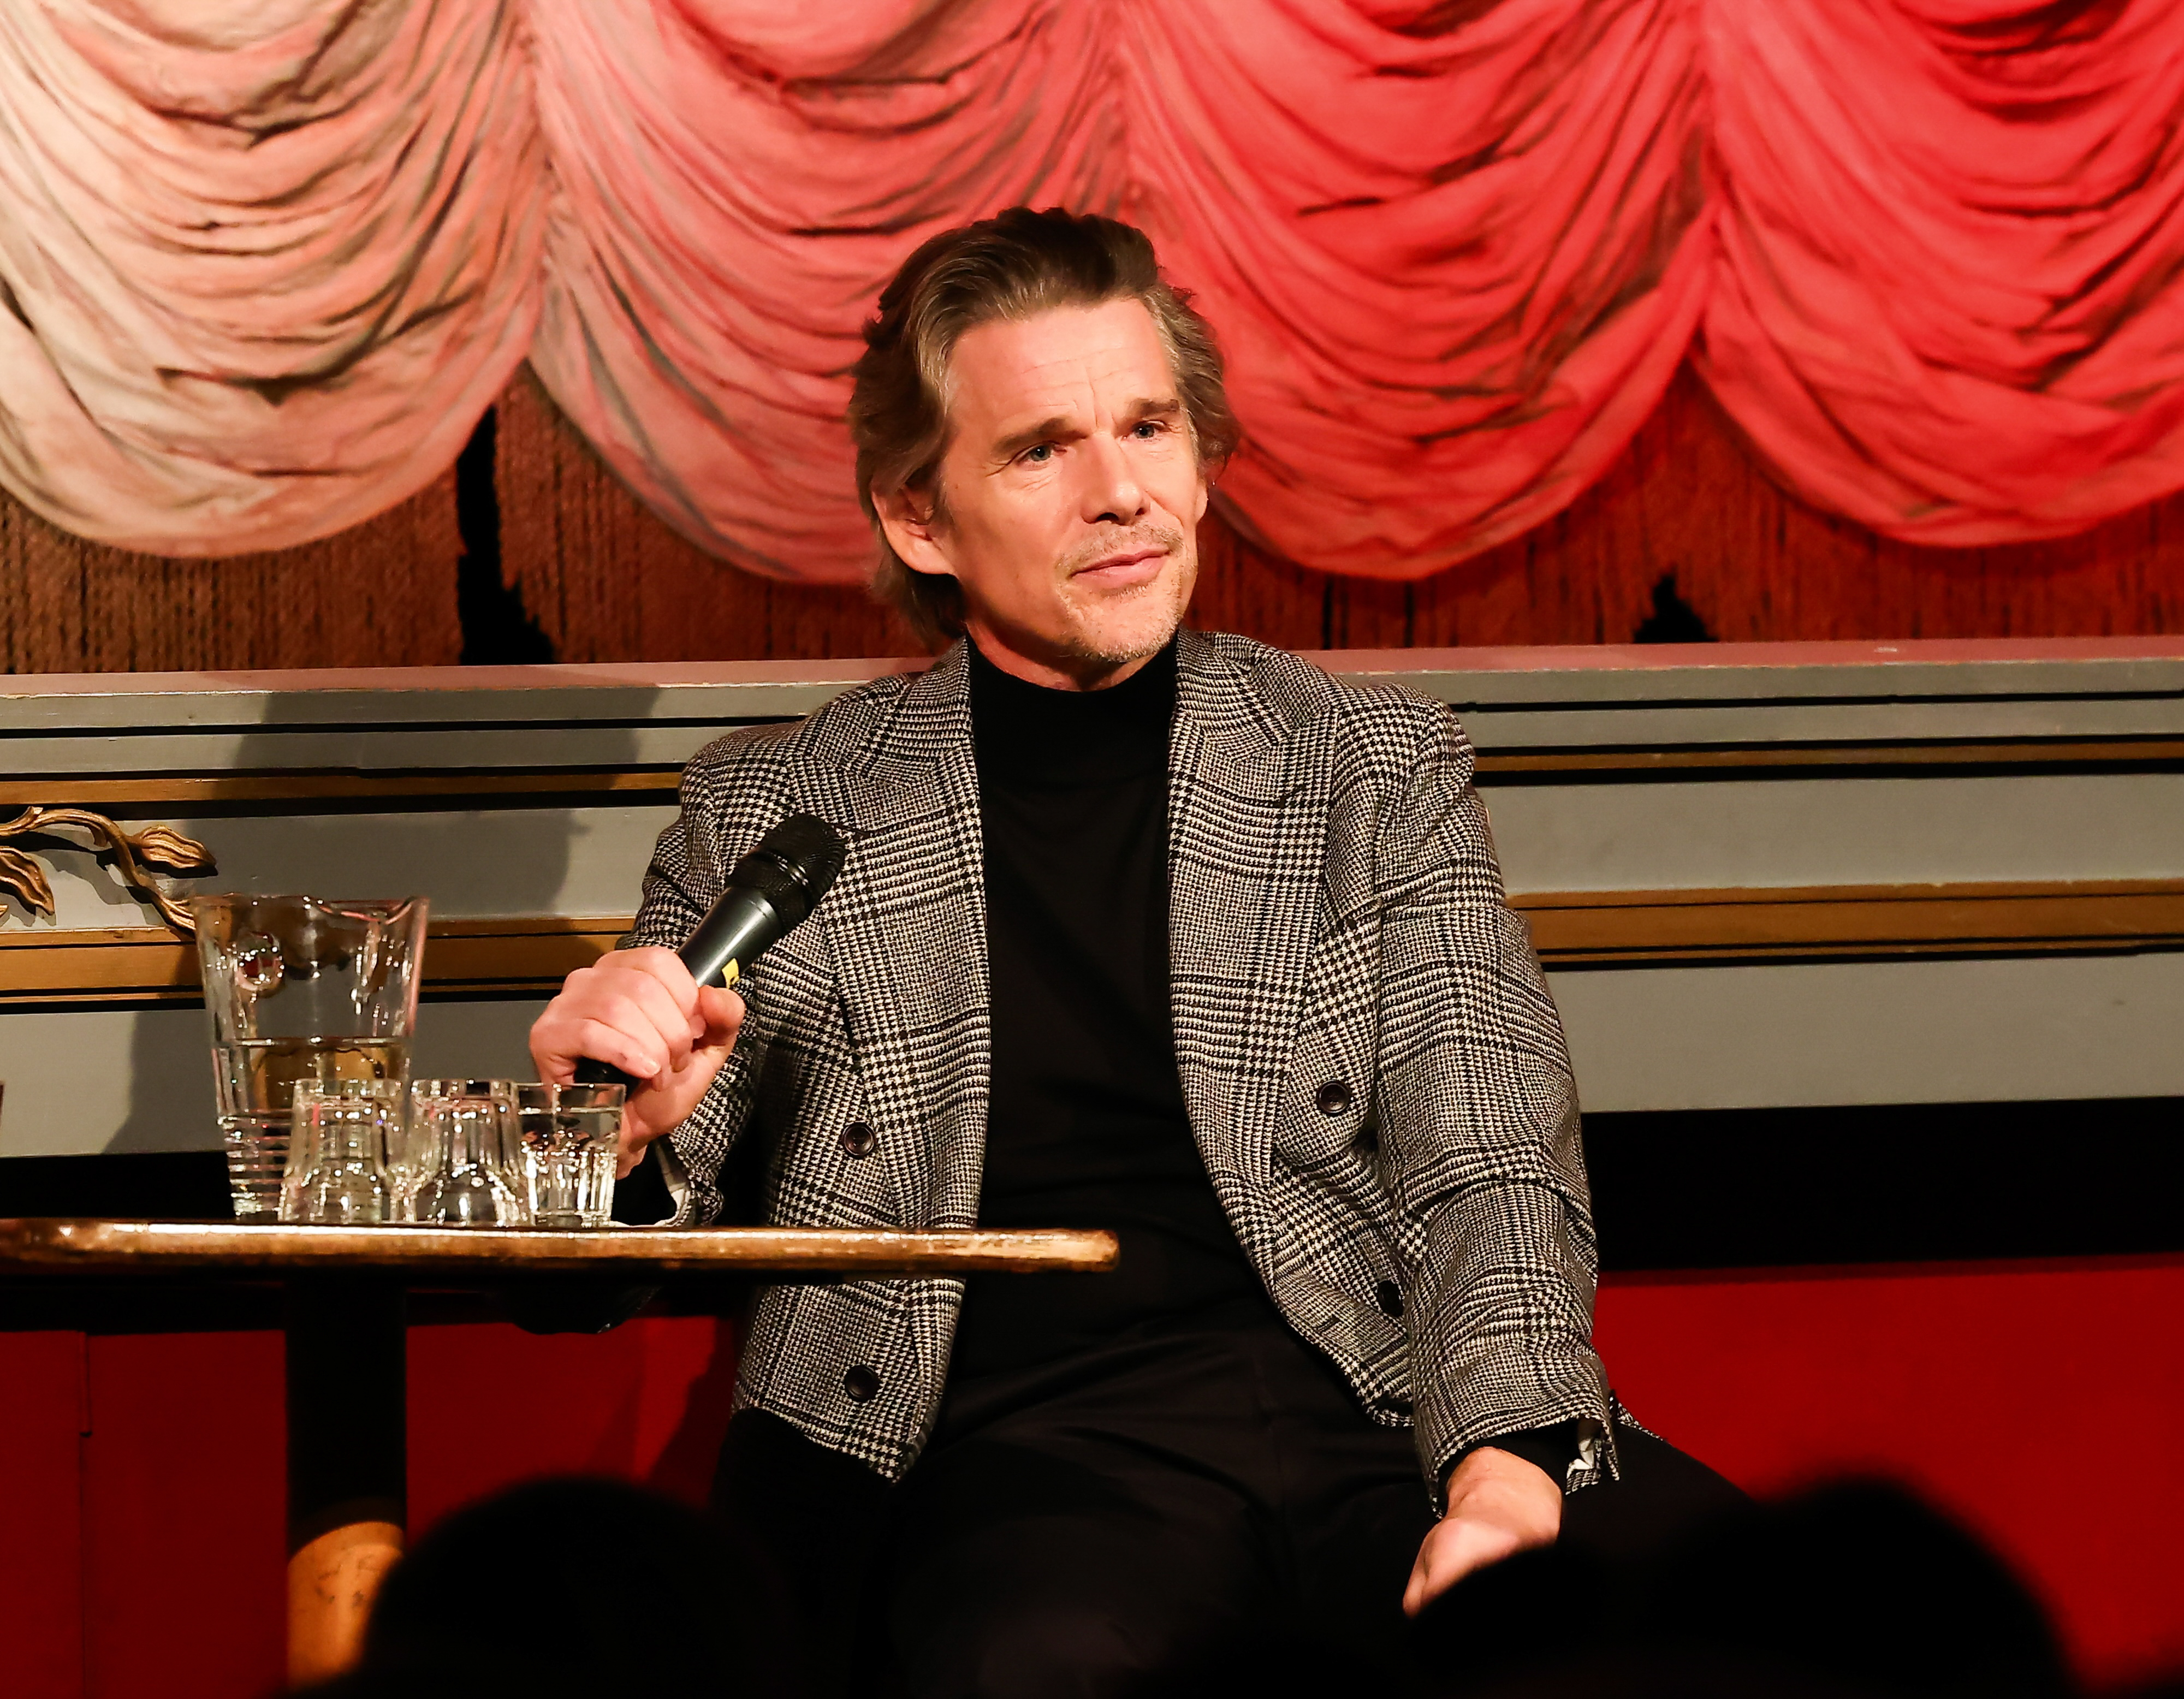 Man in a plaid jacket and black turtleneck seated, holding a microphone, with a red draped background